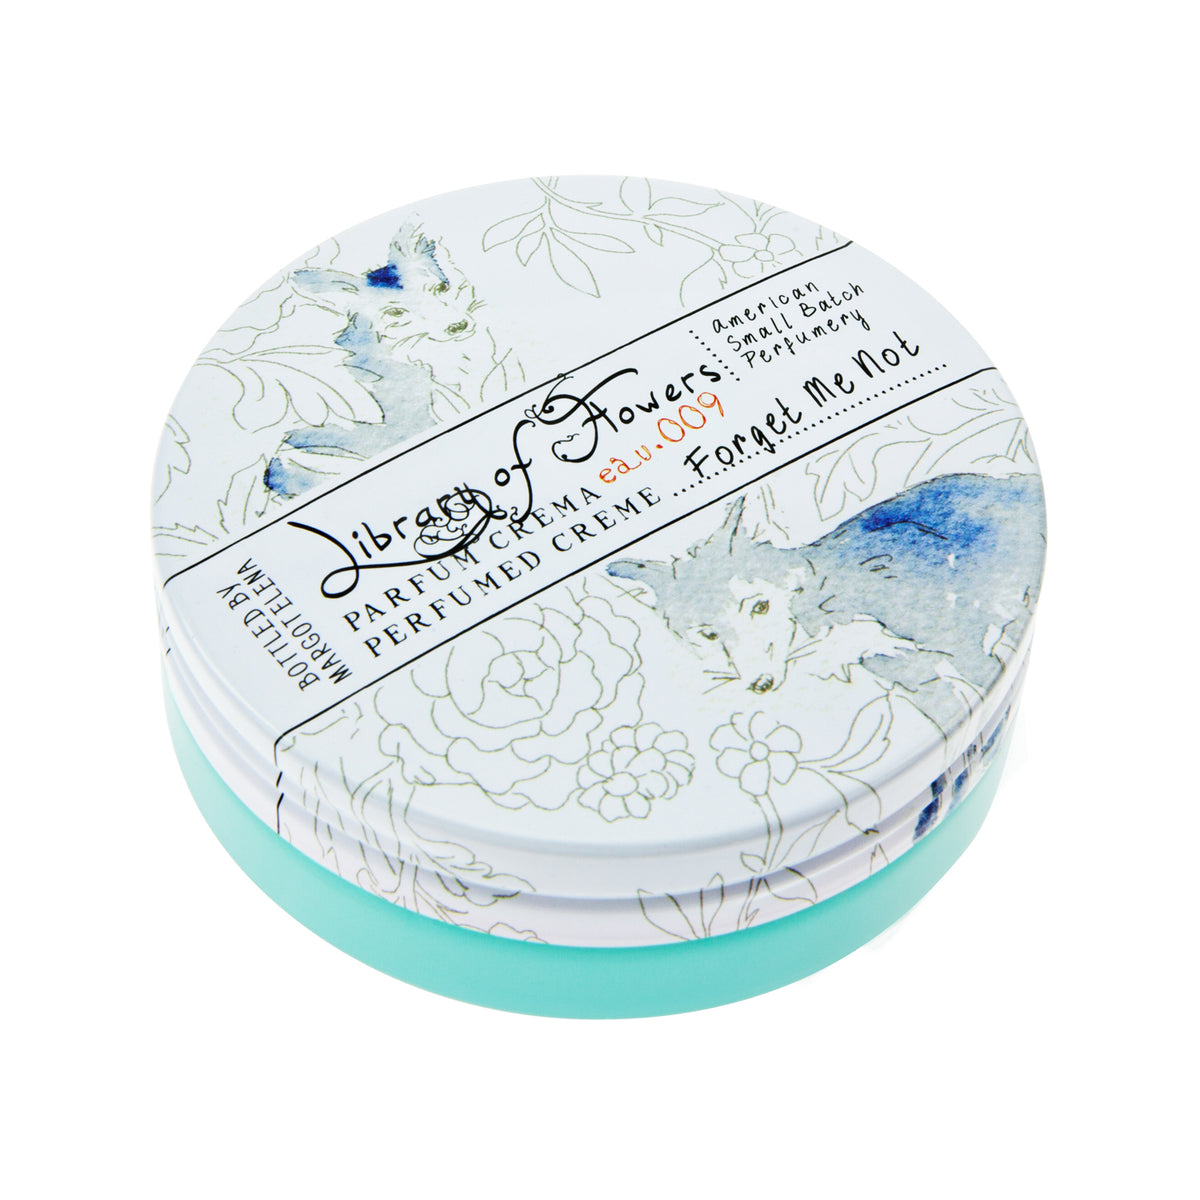 Round container of Margot Elena's Library of Flowers Forget Me Not Parfum Crema with delicate floral illustrations in blue and white on the lid. Text on the top includes product details.